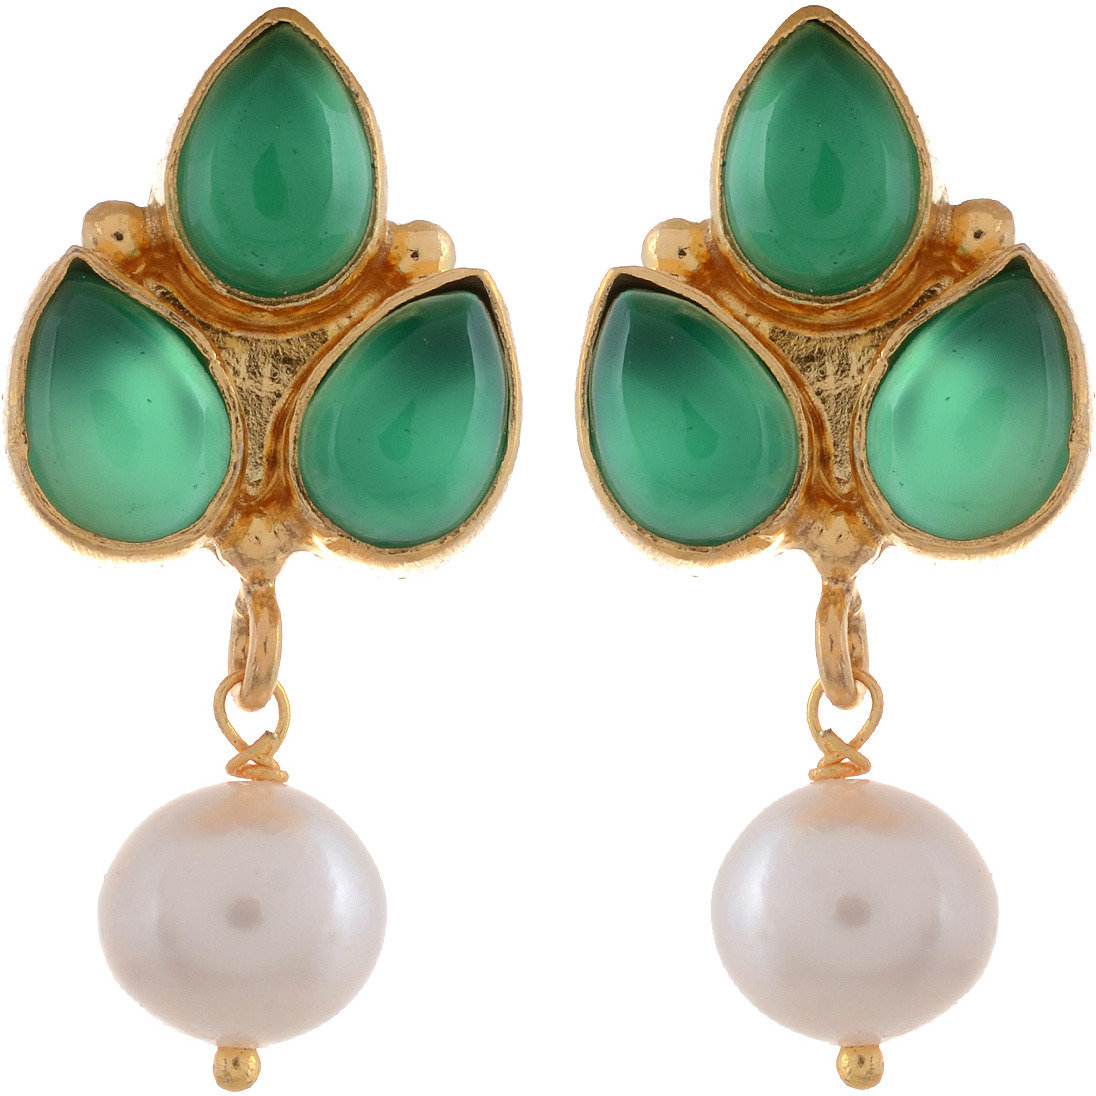 Gold Plated Trendy Design, Green Turquoise, Pearl Studs Earrings By Silvermerc Designs